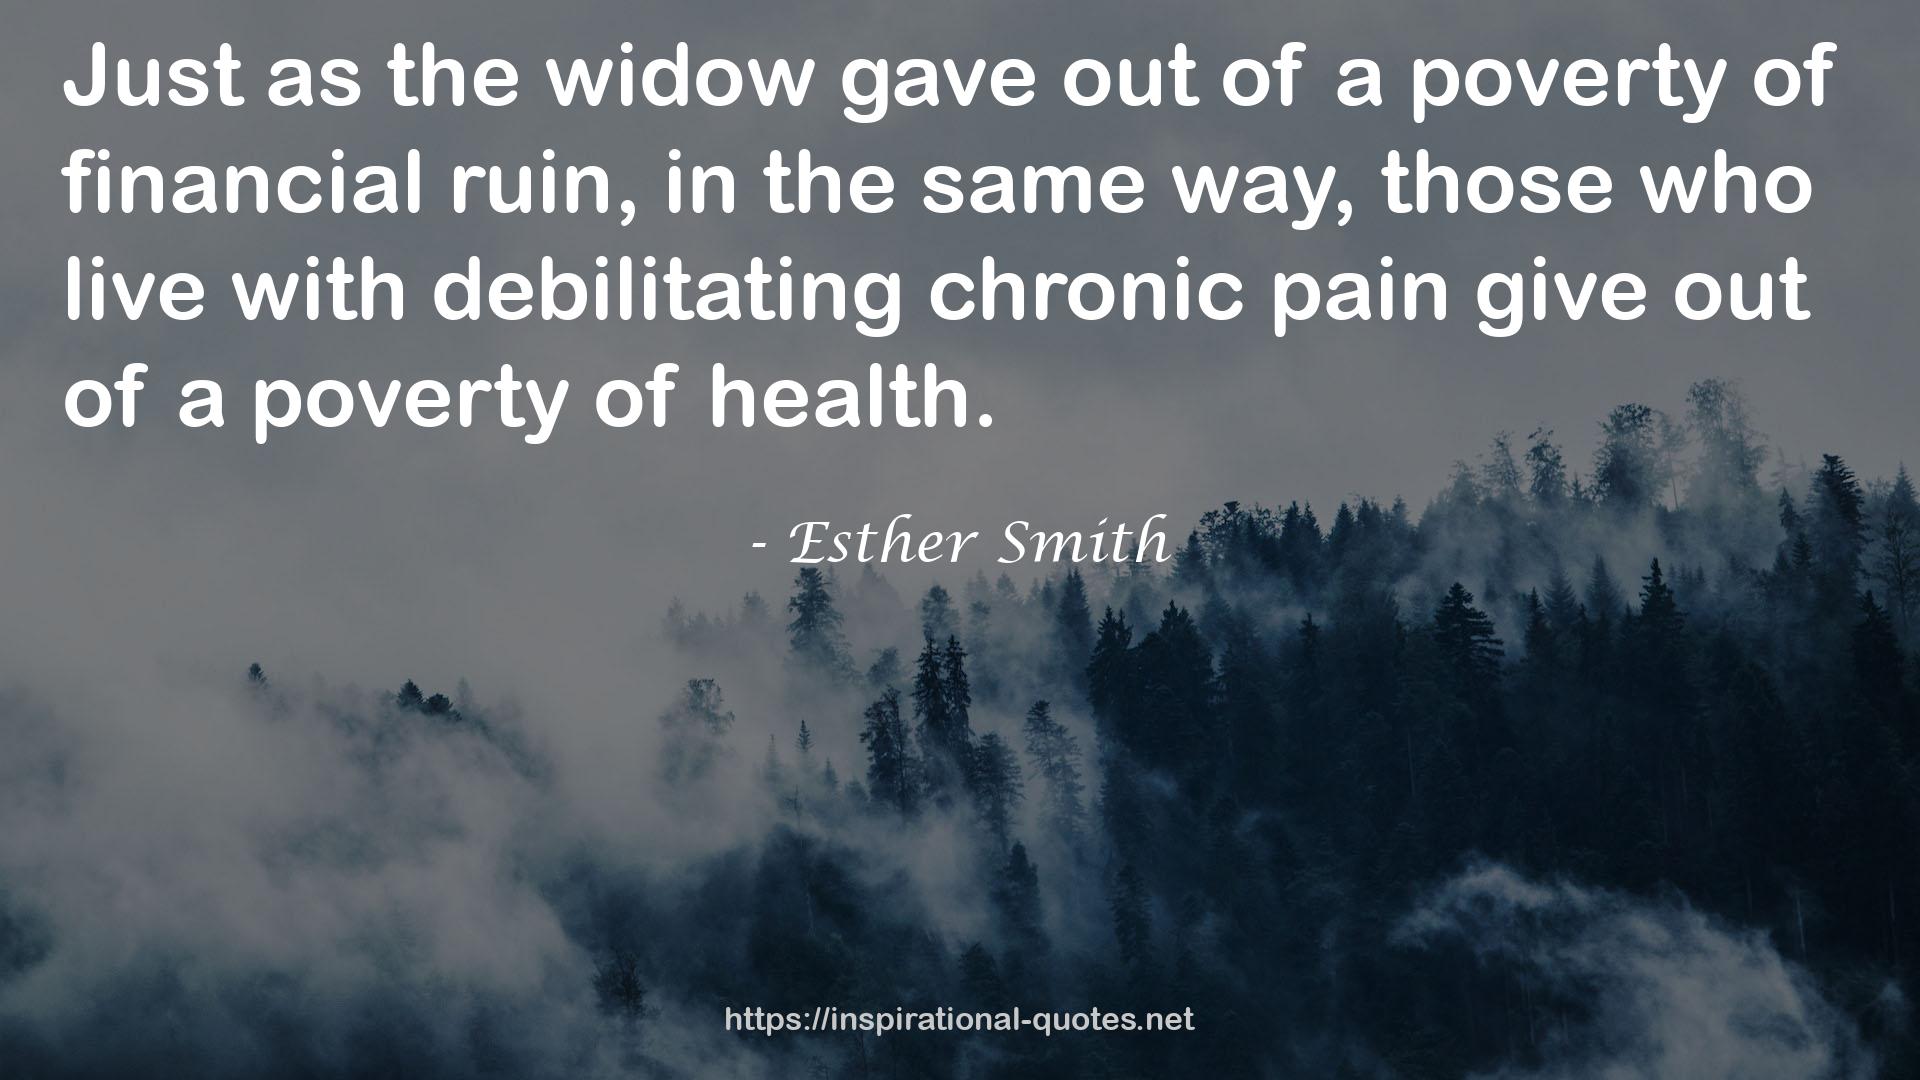 Esther Smith QUOTES